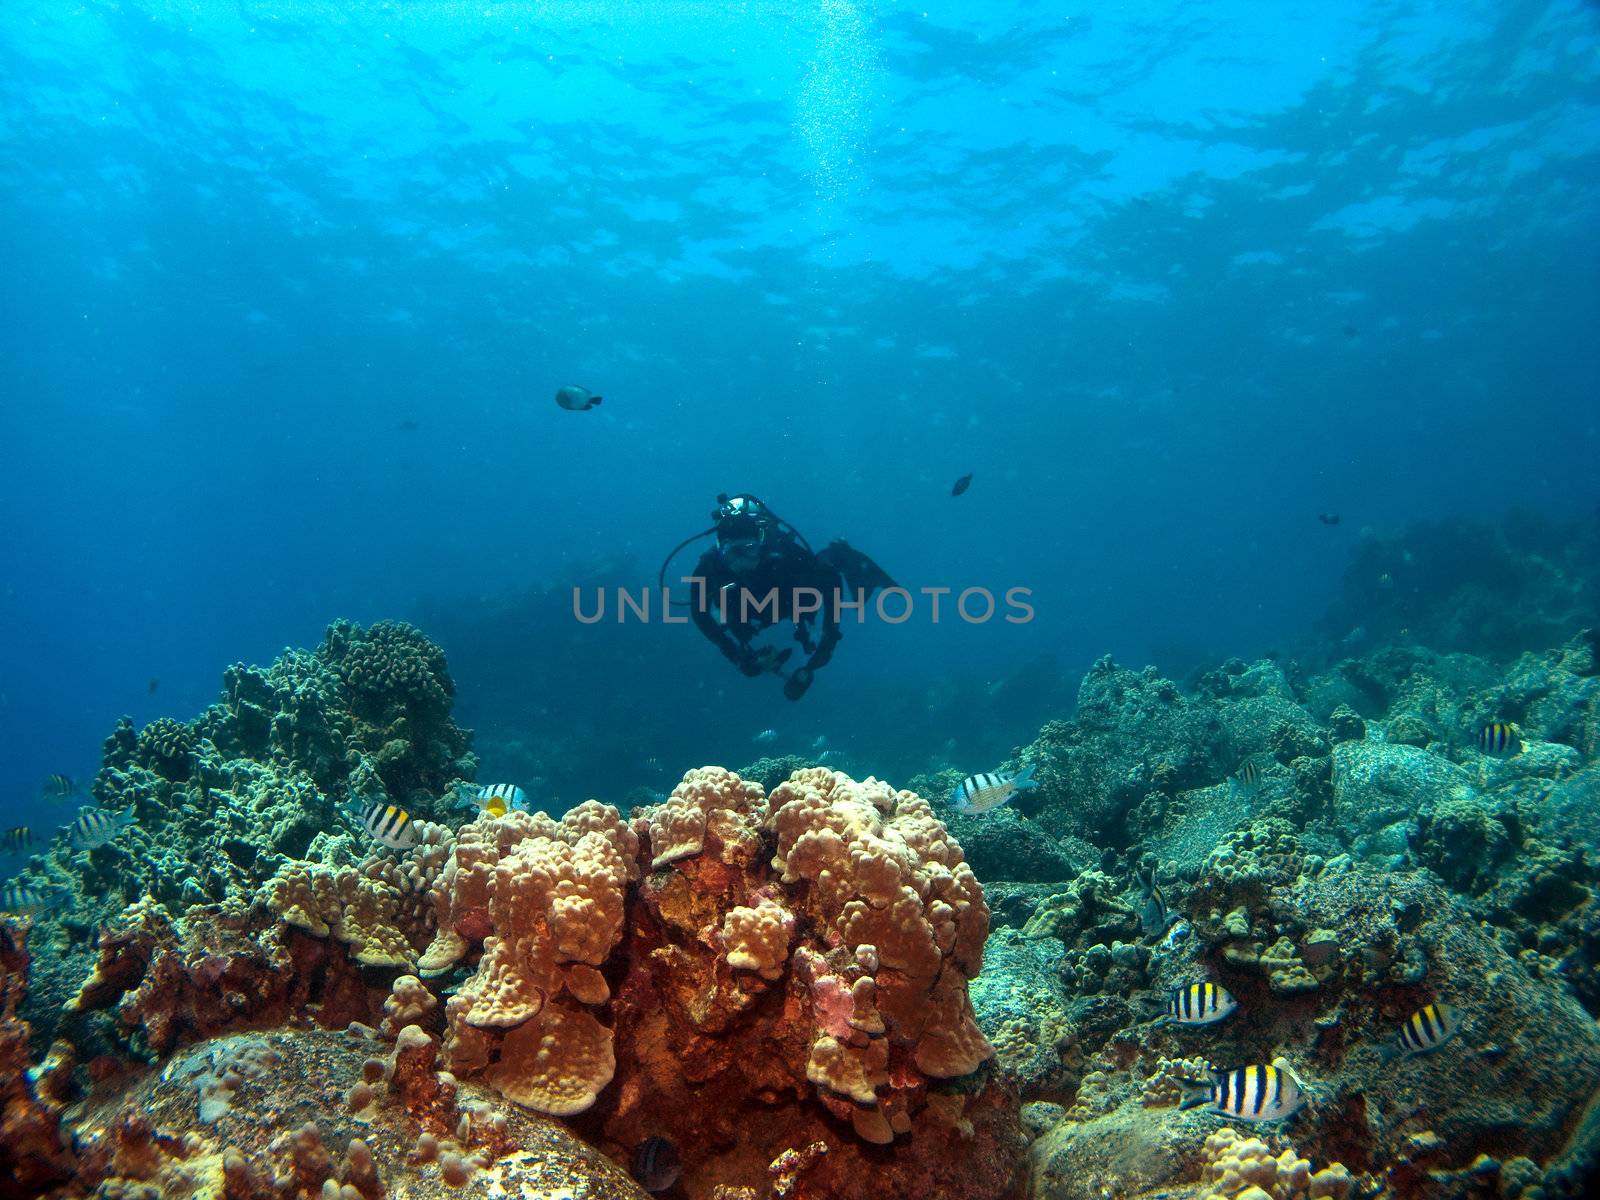 Diver on a Reef with Sergeant Major Fish by KevinPanizza